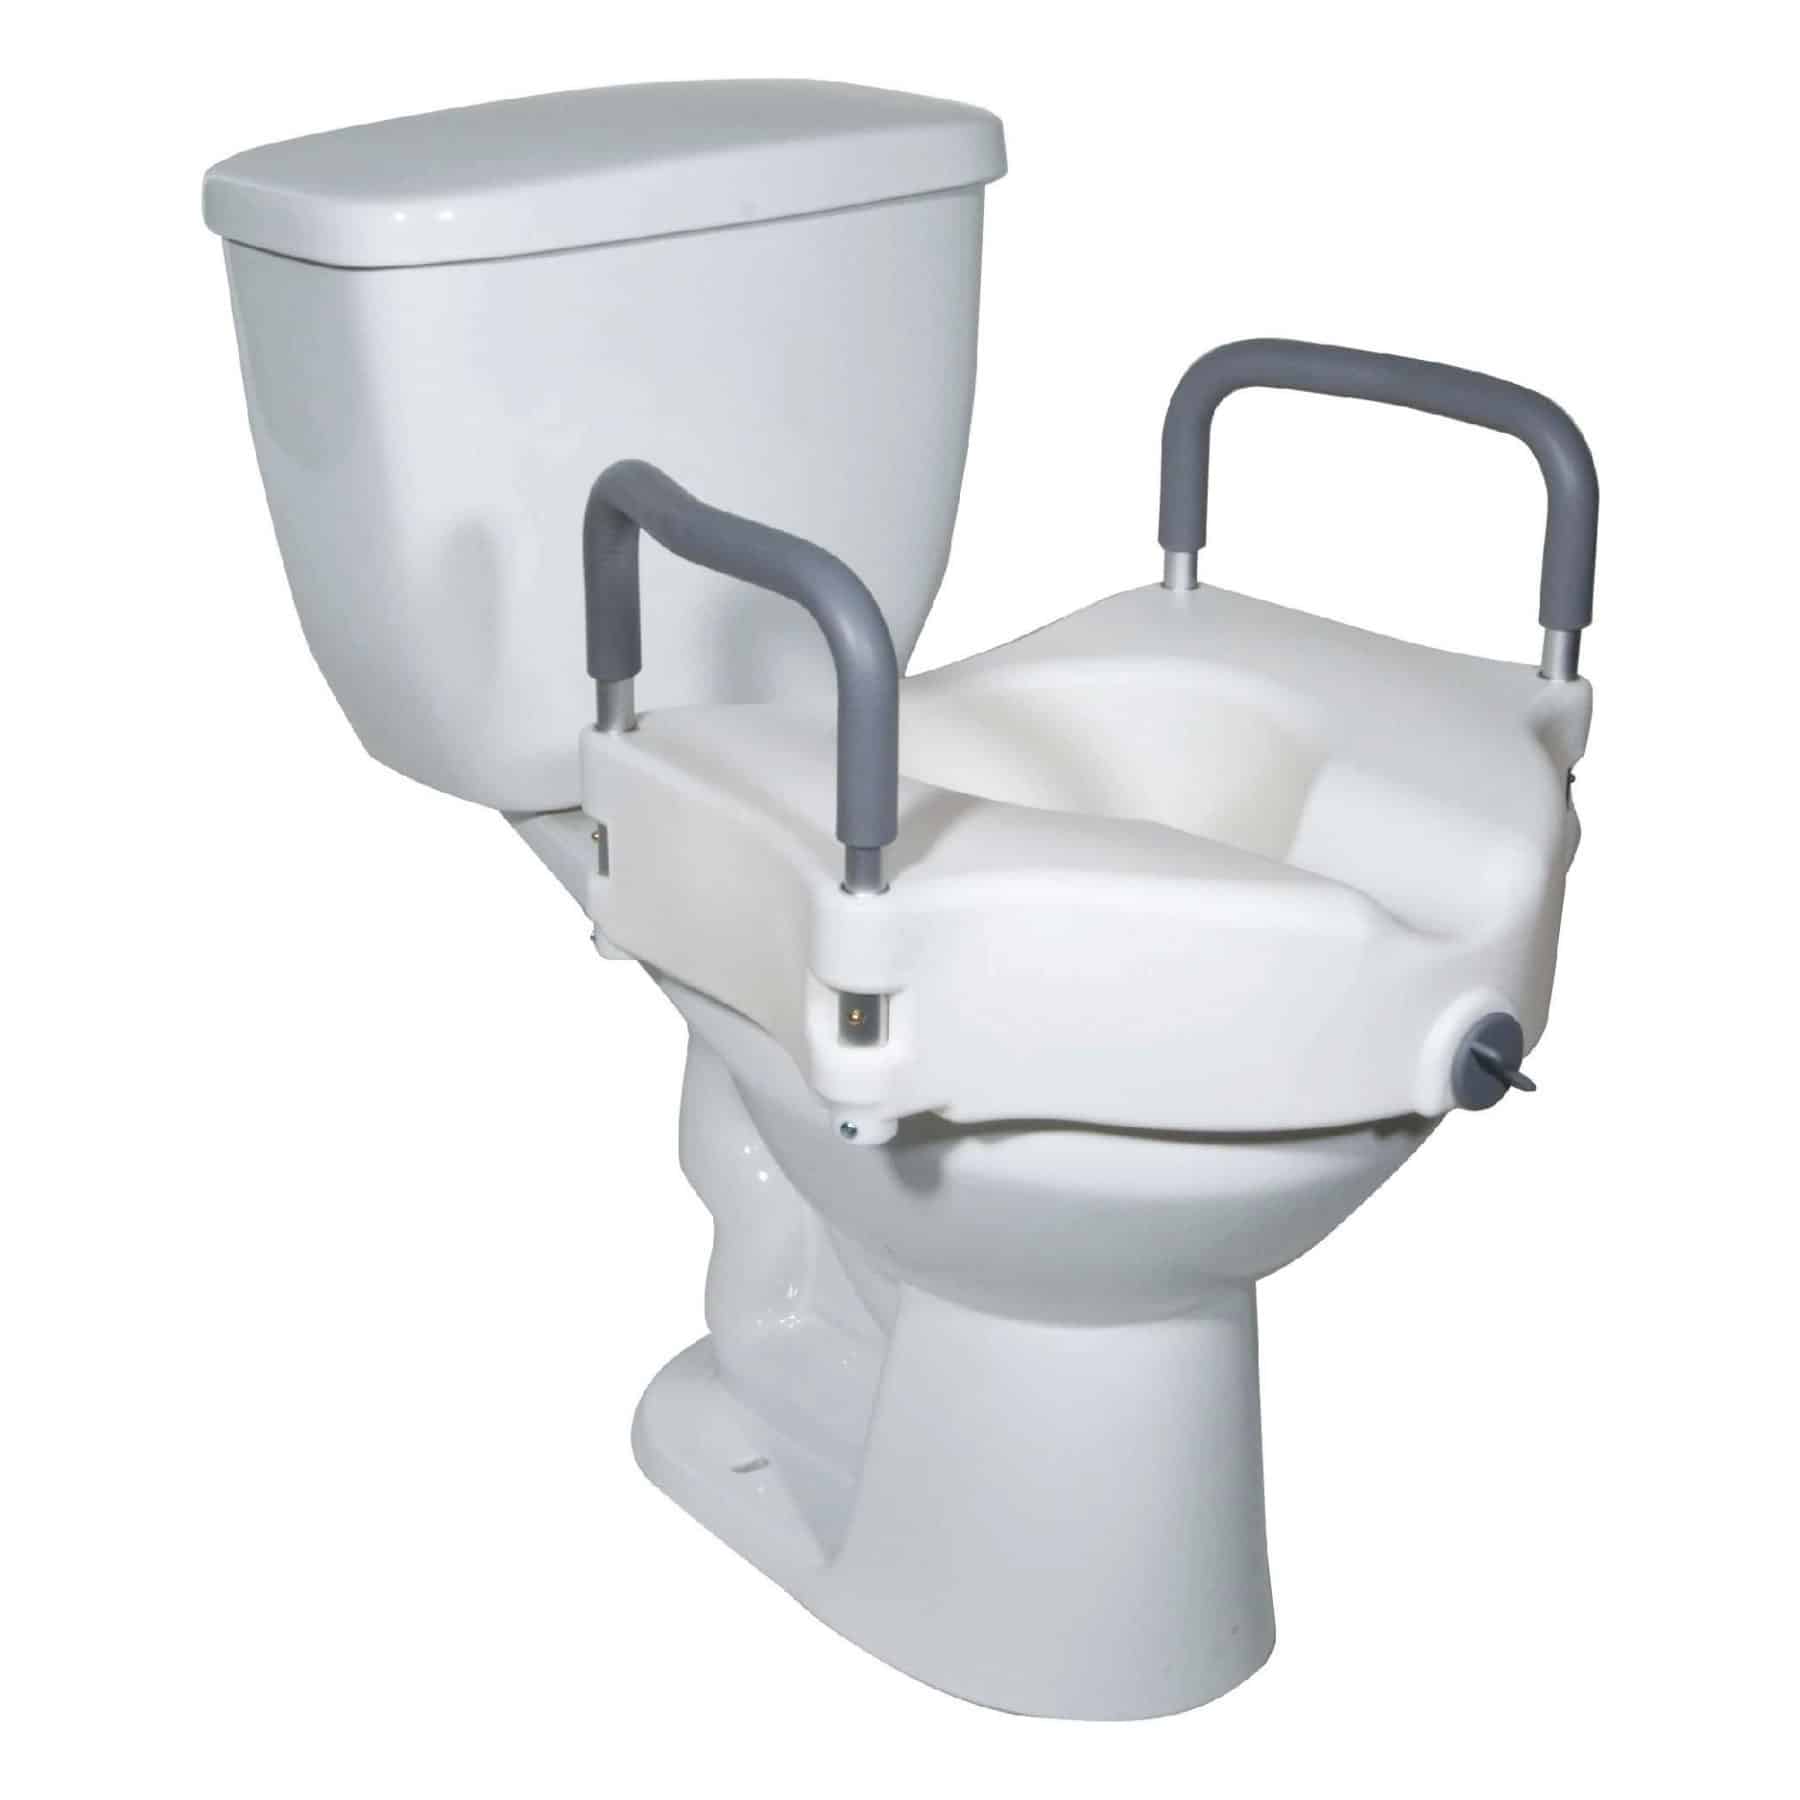 13_TOILET SEAT RISER WITH ARMS-01